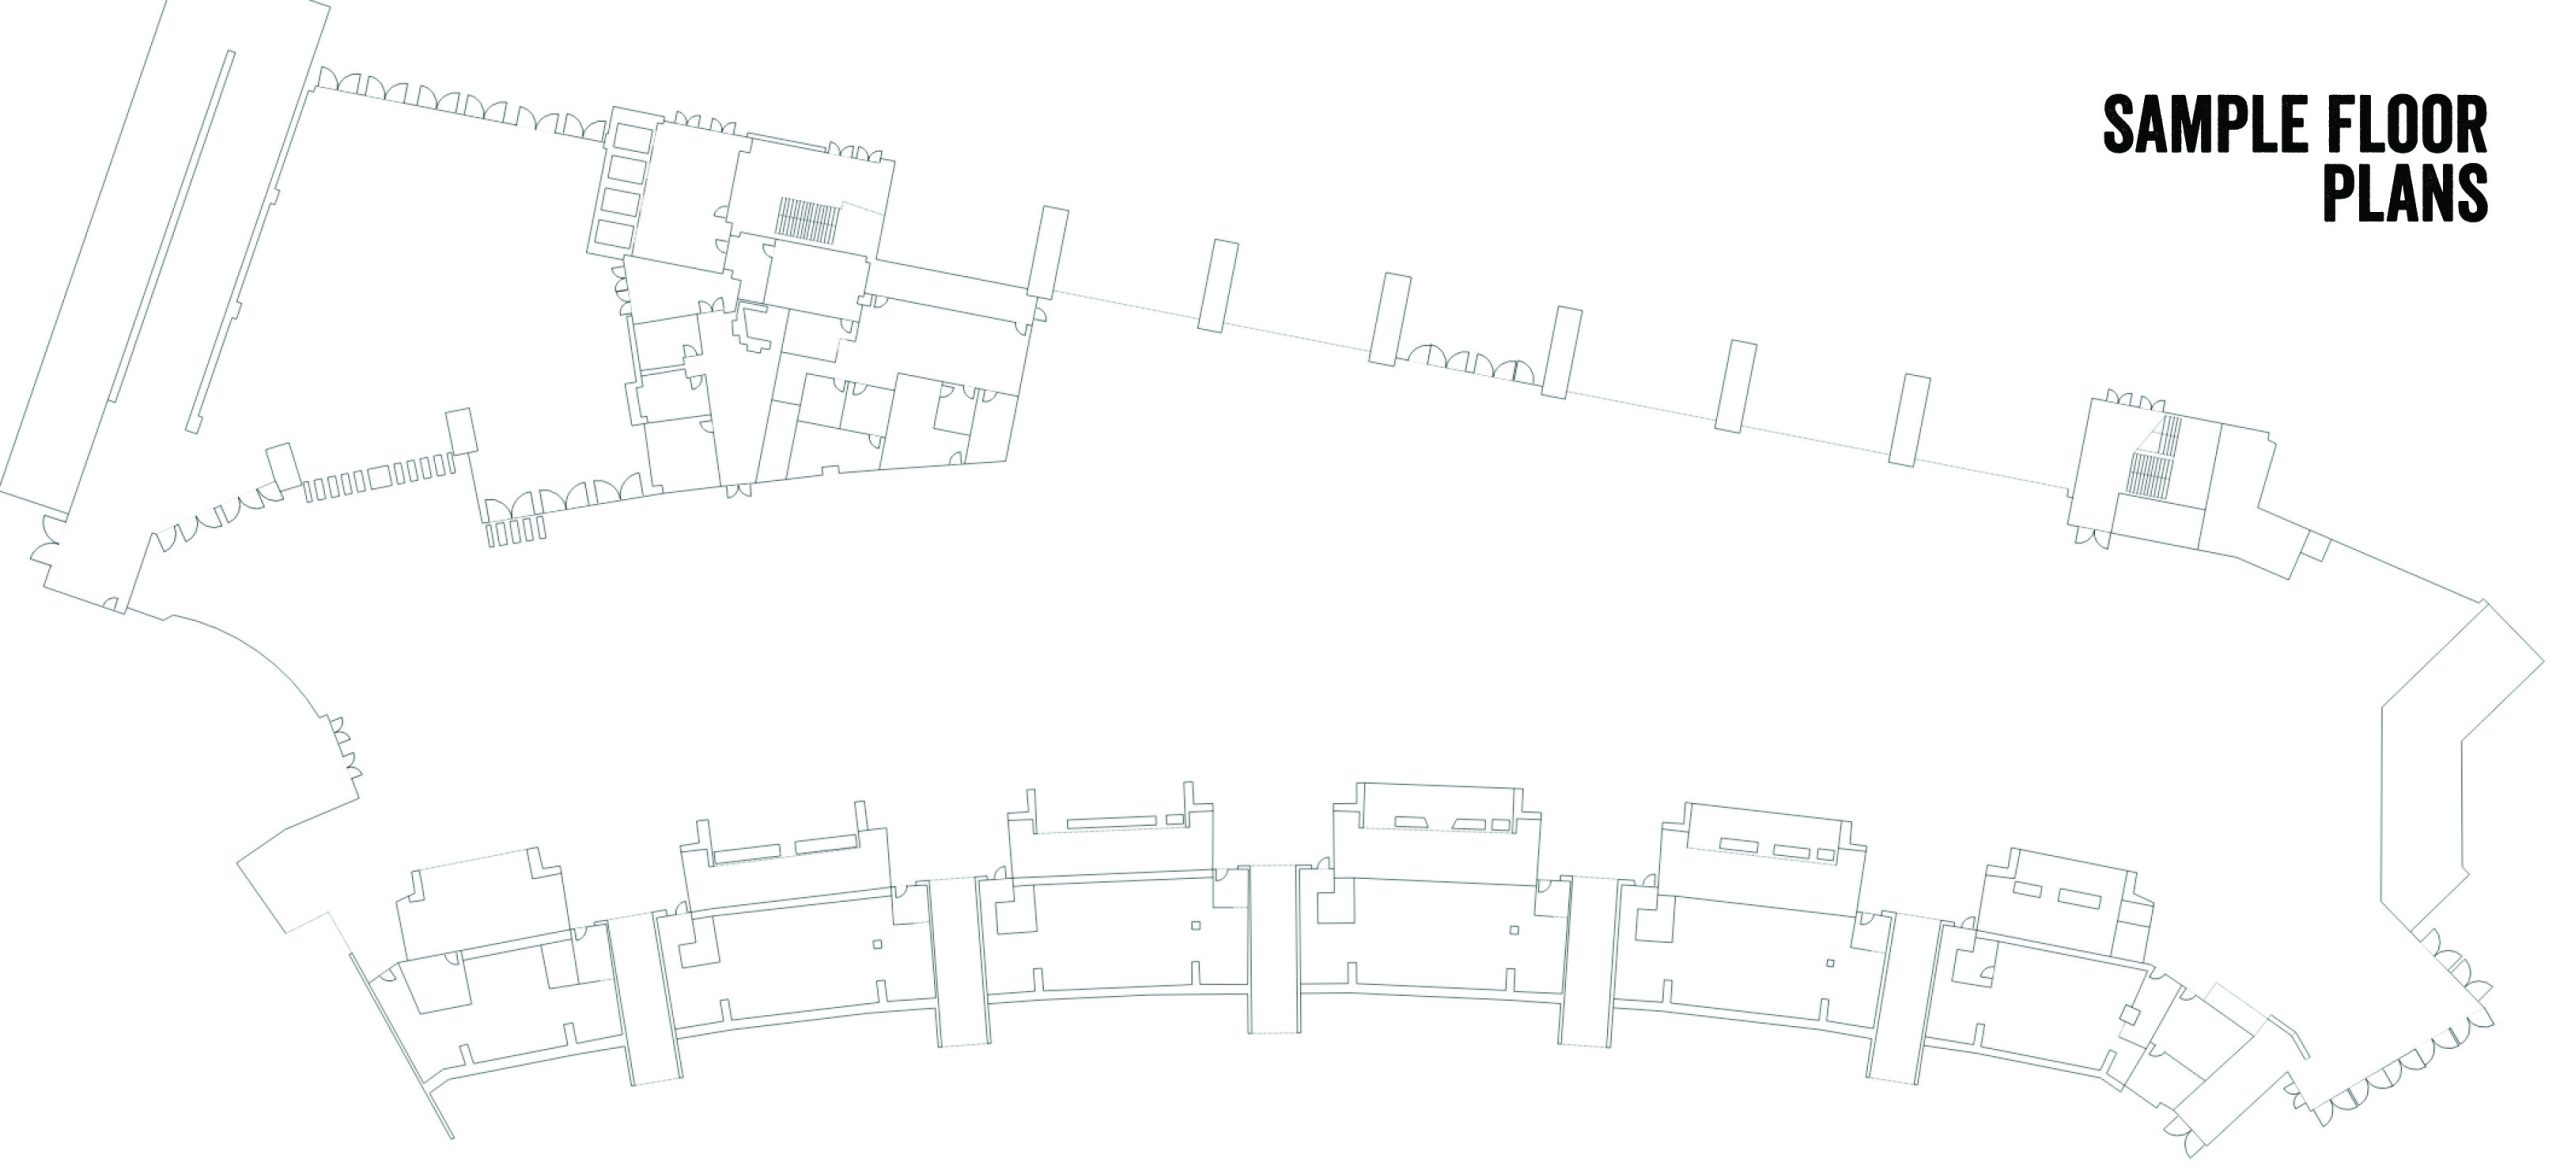 A sample floor plan for an event in the Great Hall